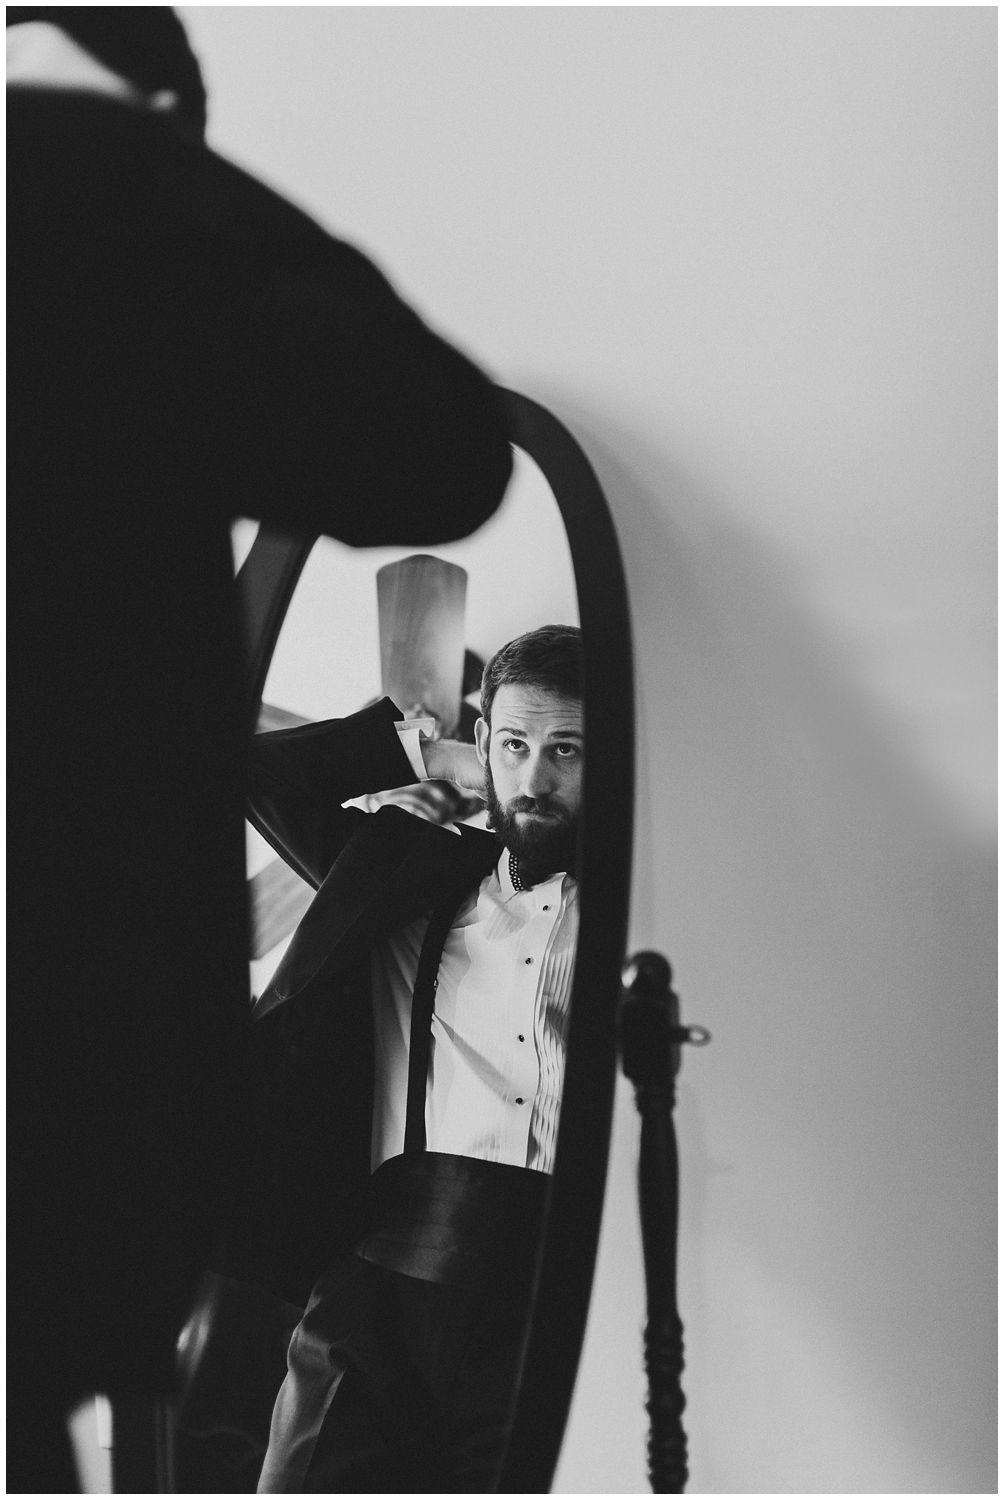 groom getting ready in front of mirror